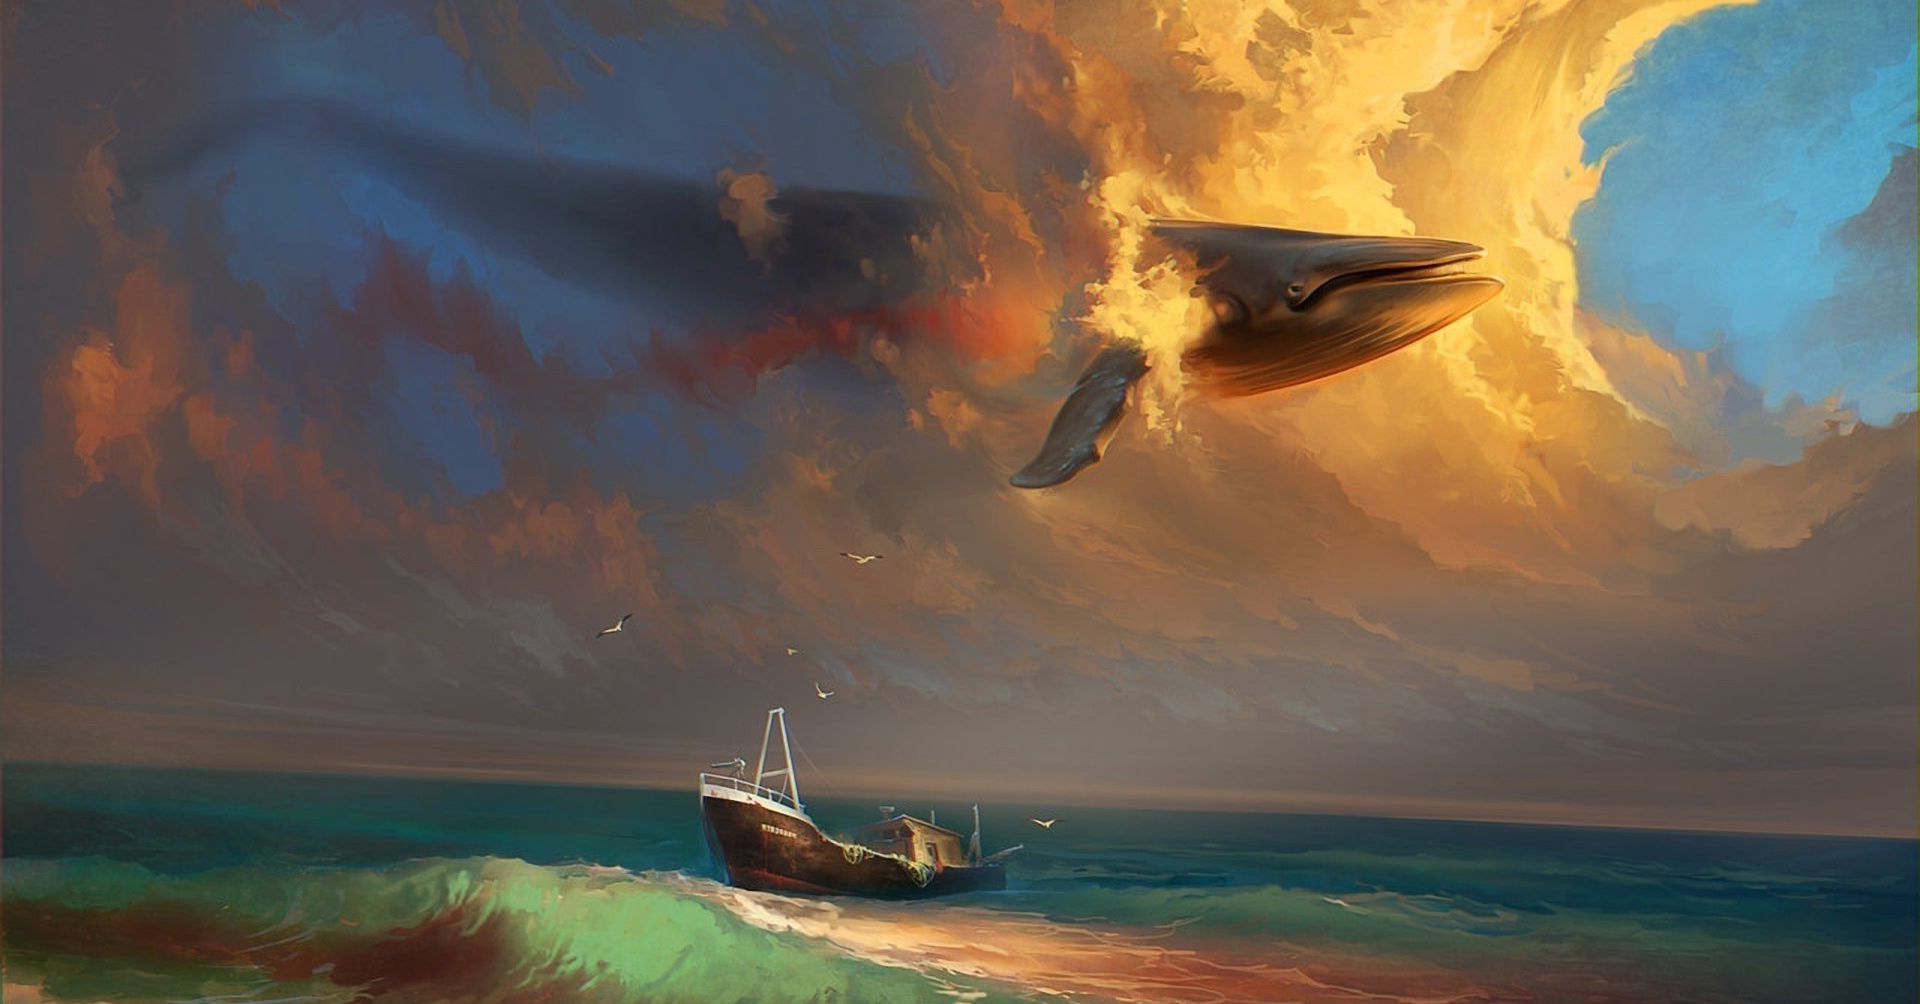 Paintings Clouds Ships Whales Seagulls Artwork Whale Sea Wallpaper